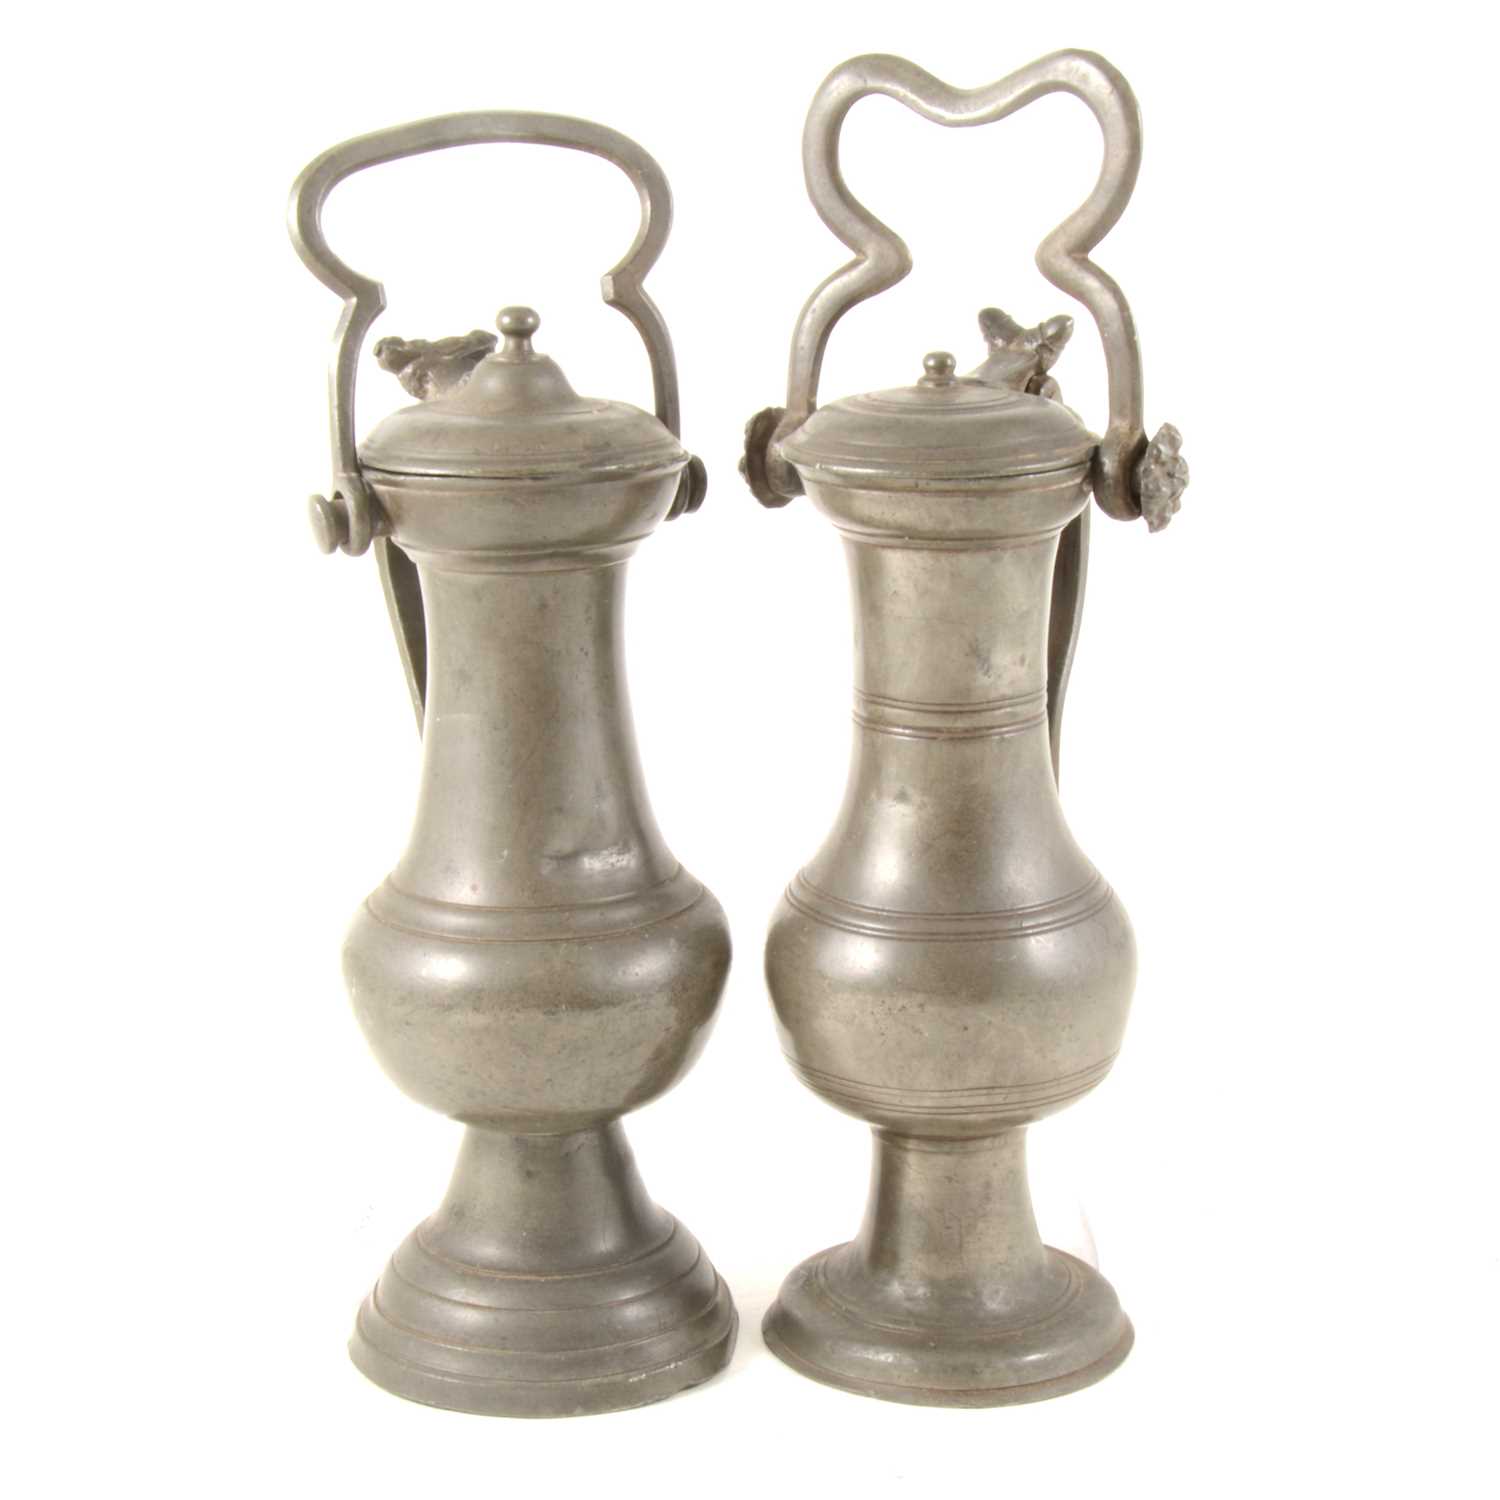 Lot 155 - Two French pewter wine flagons, 18th century